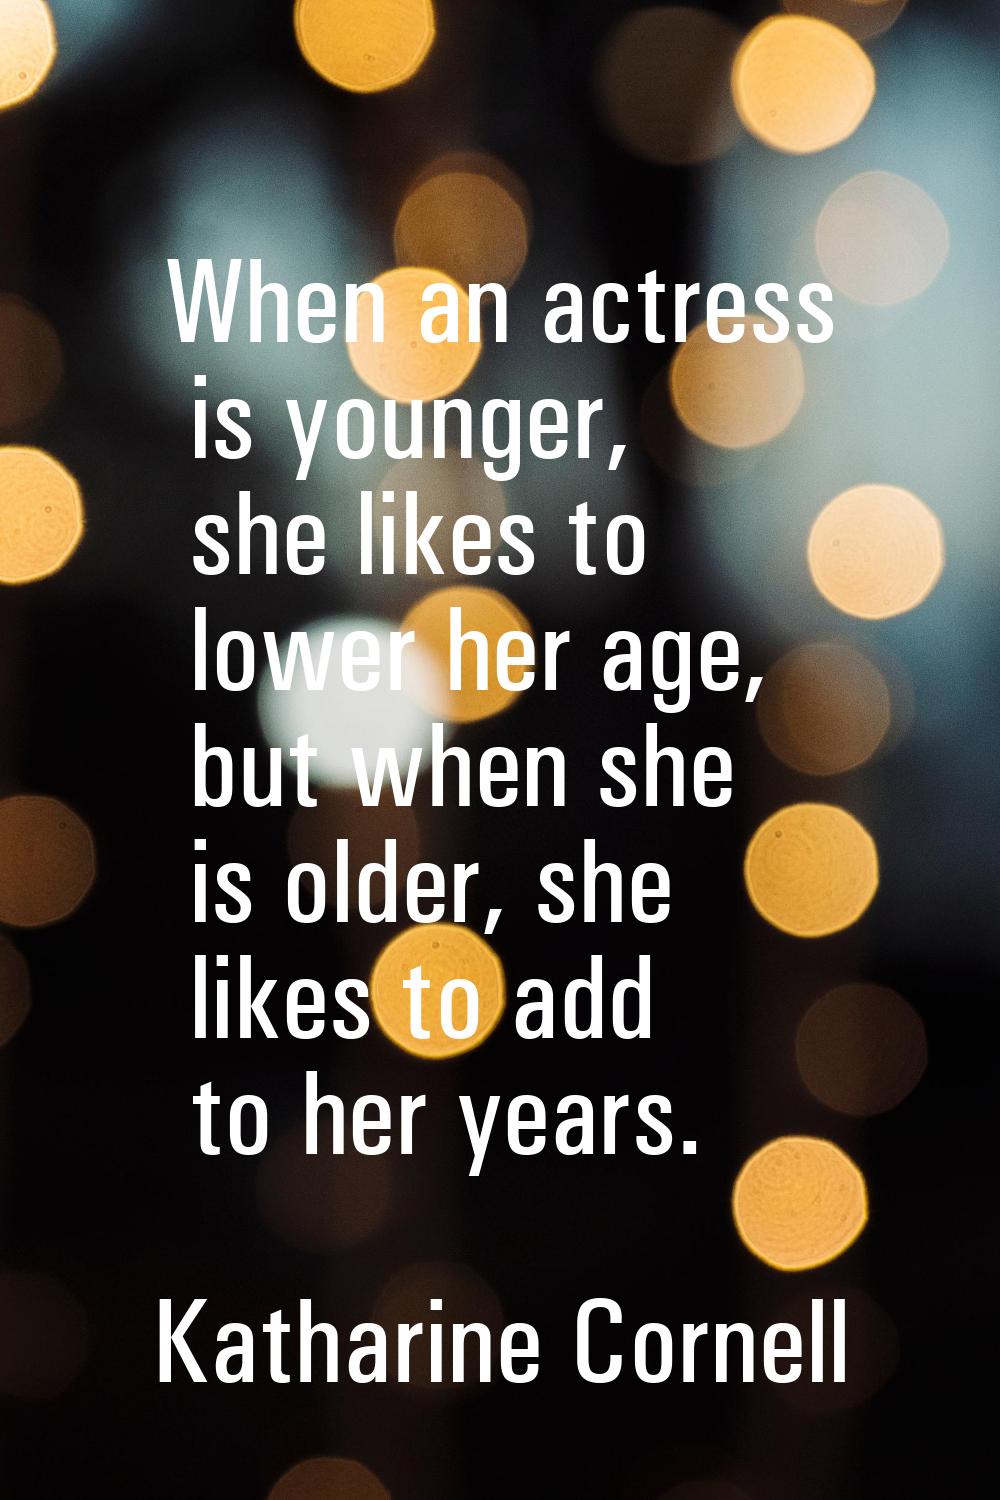 When an actress is younger, she likes to lower her age, but when she is older, she likes to add to 